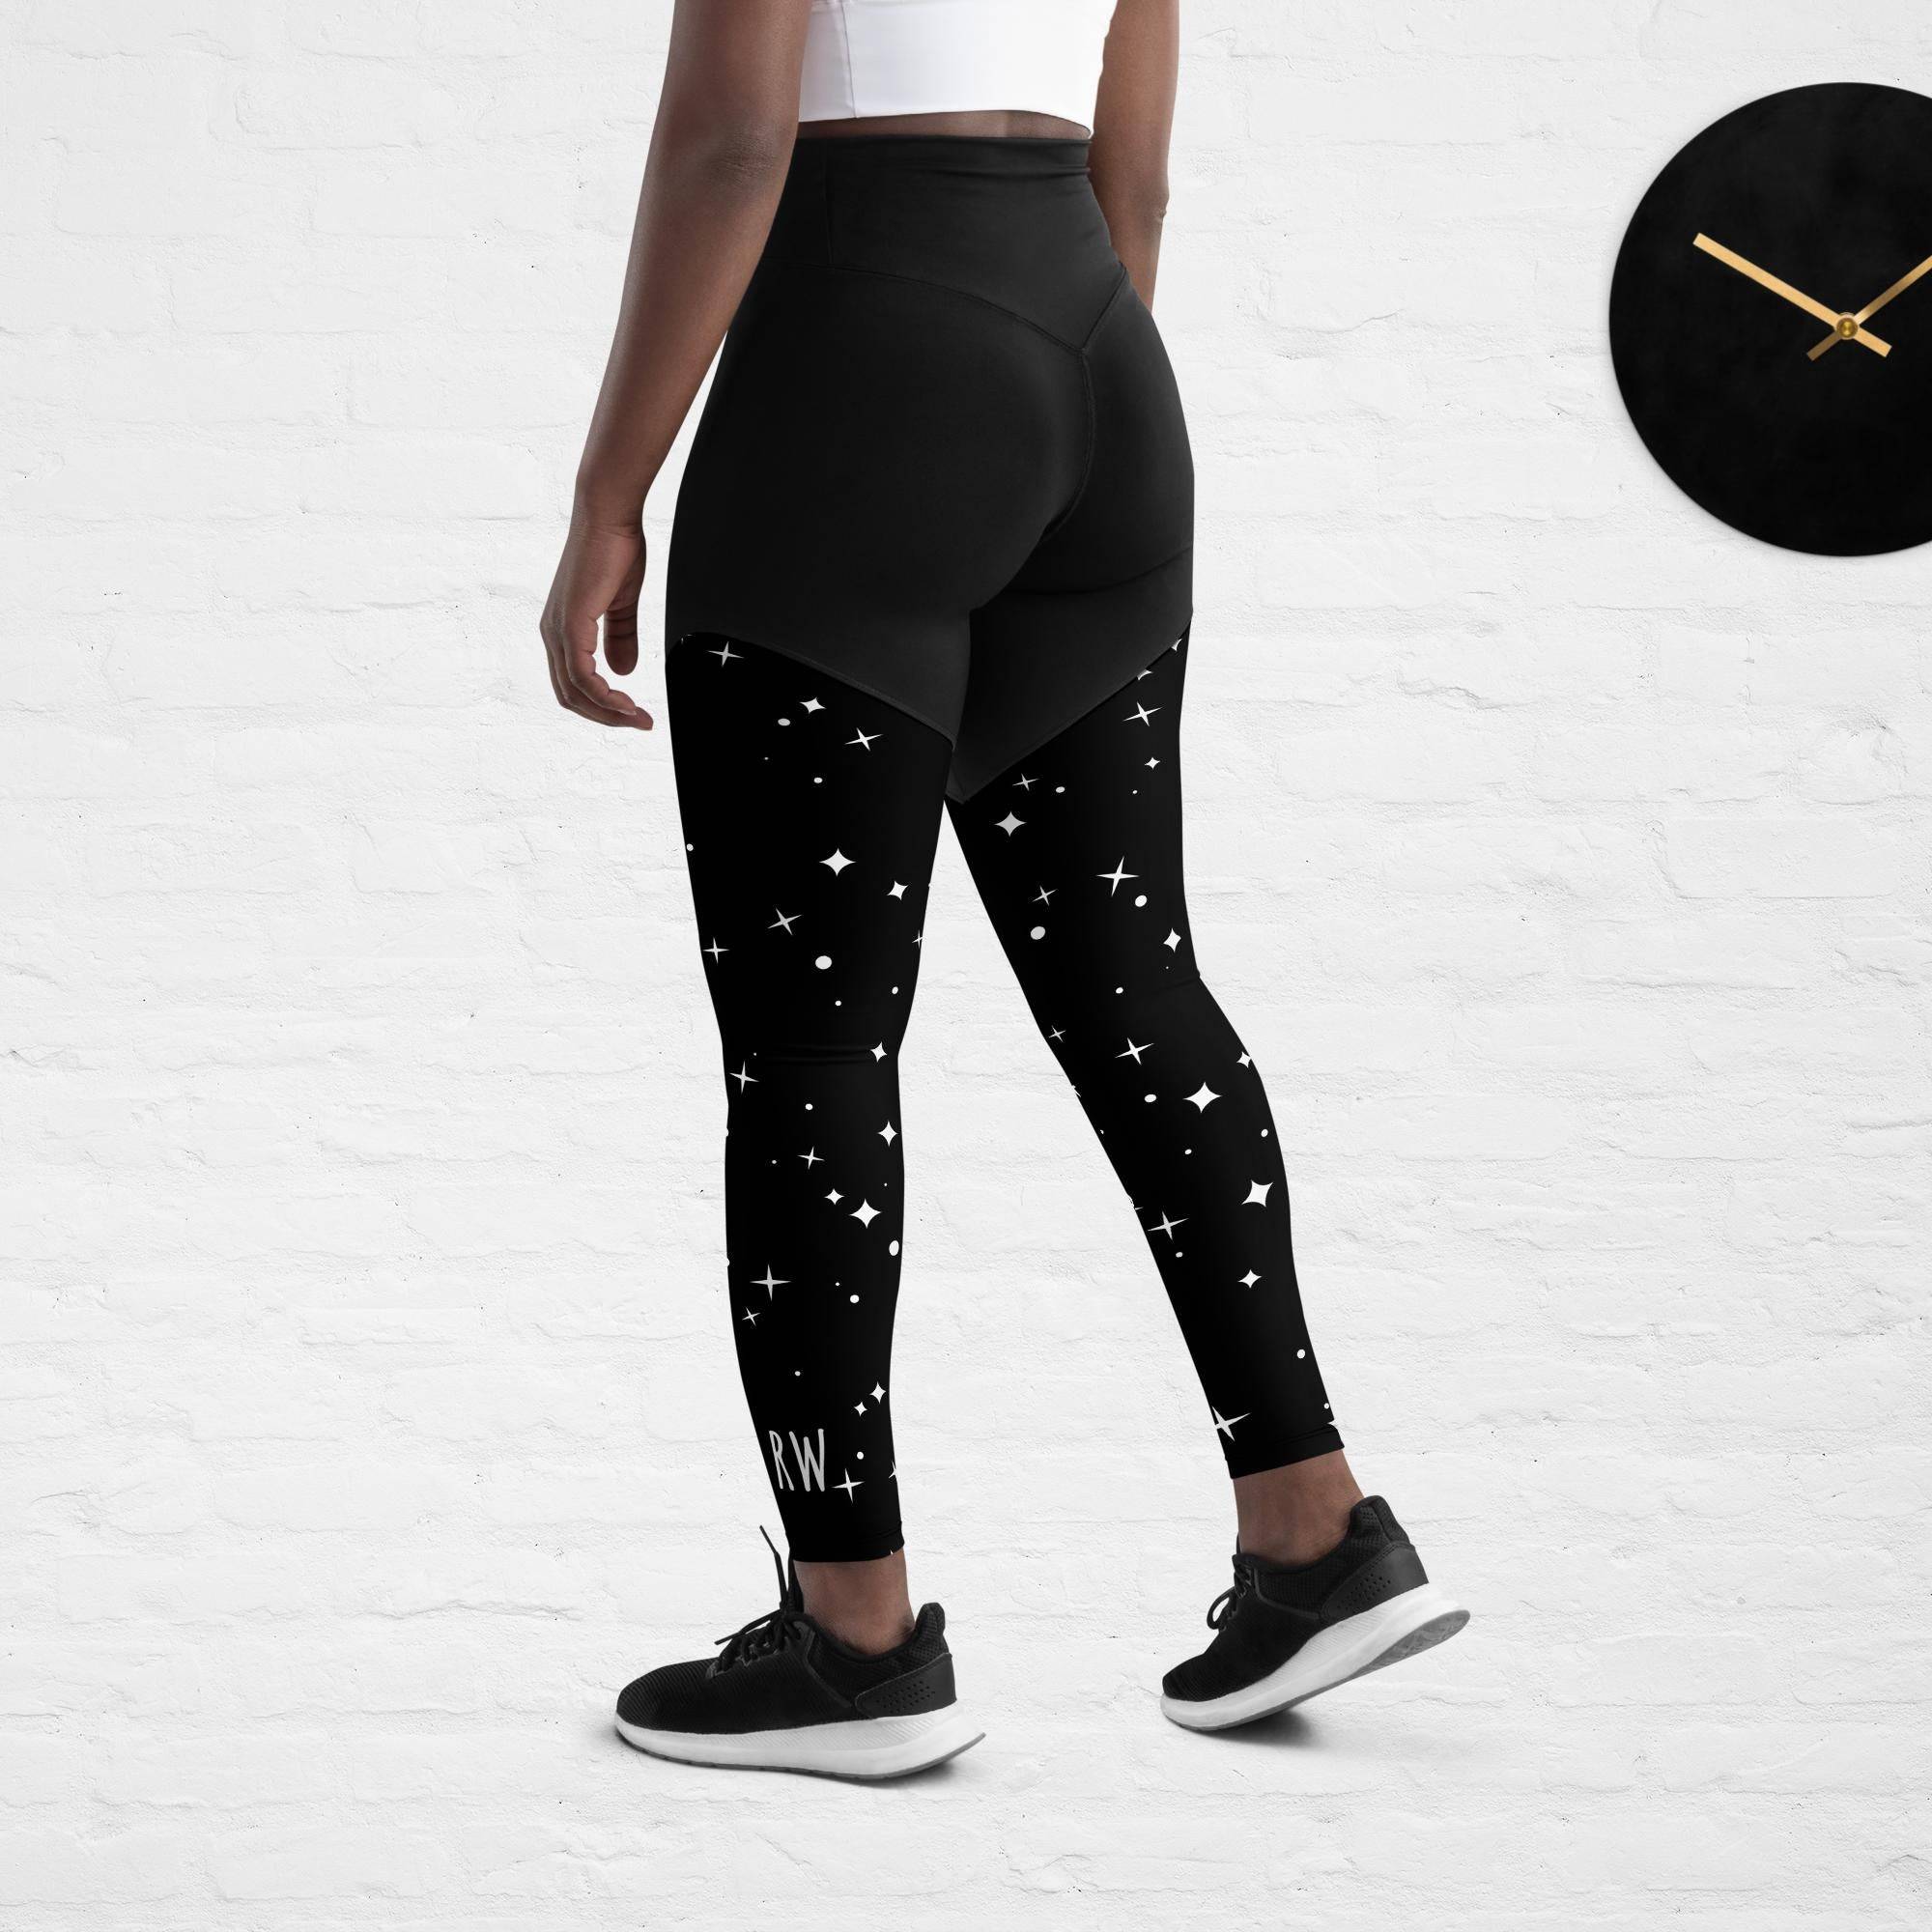 Famme Gym Tights - Leggings & Tights | Boozt.com